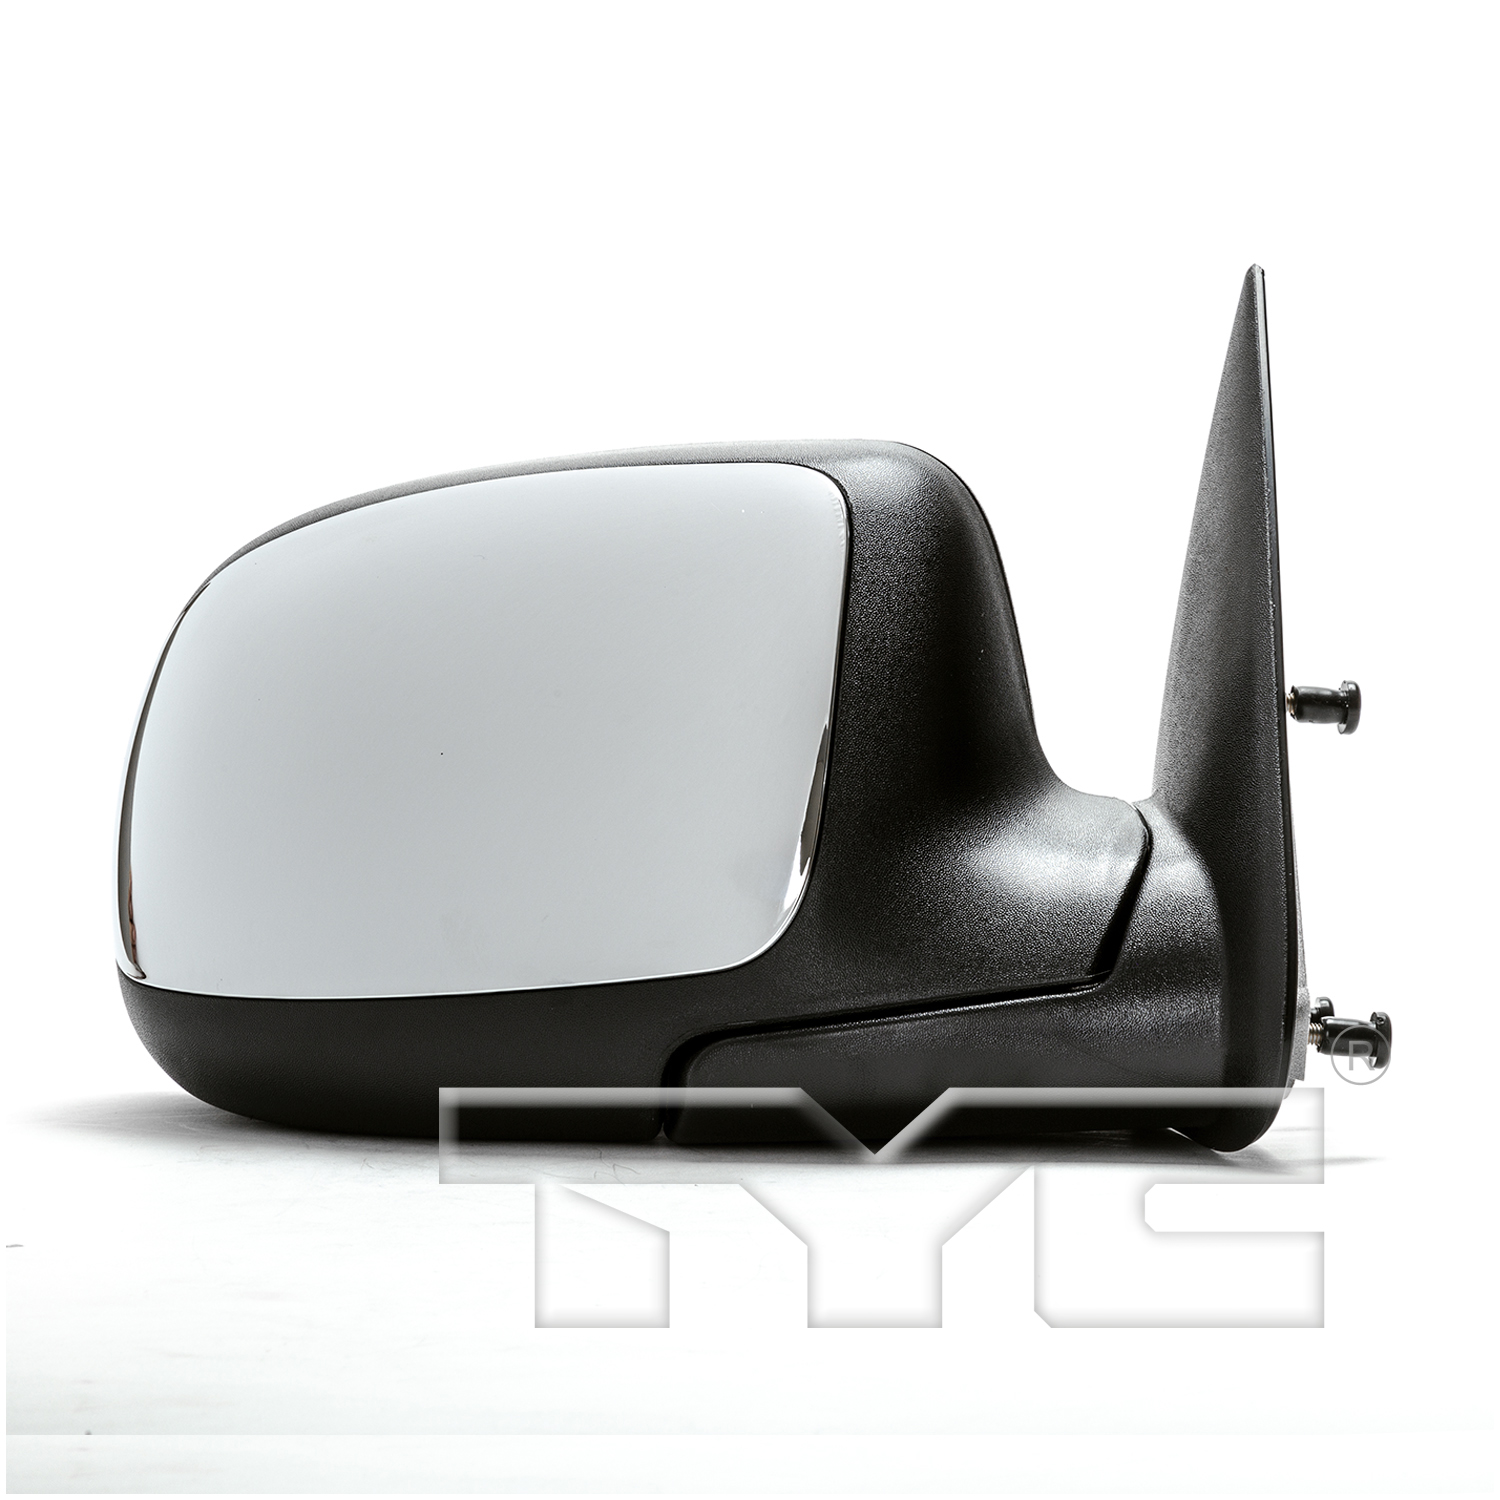 Aftermarket MIRRORS for CHEVROLET - TAHOE, TAHOE,00-00,RT Mirror outside rear view